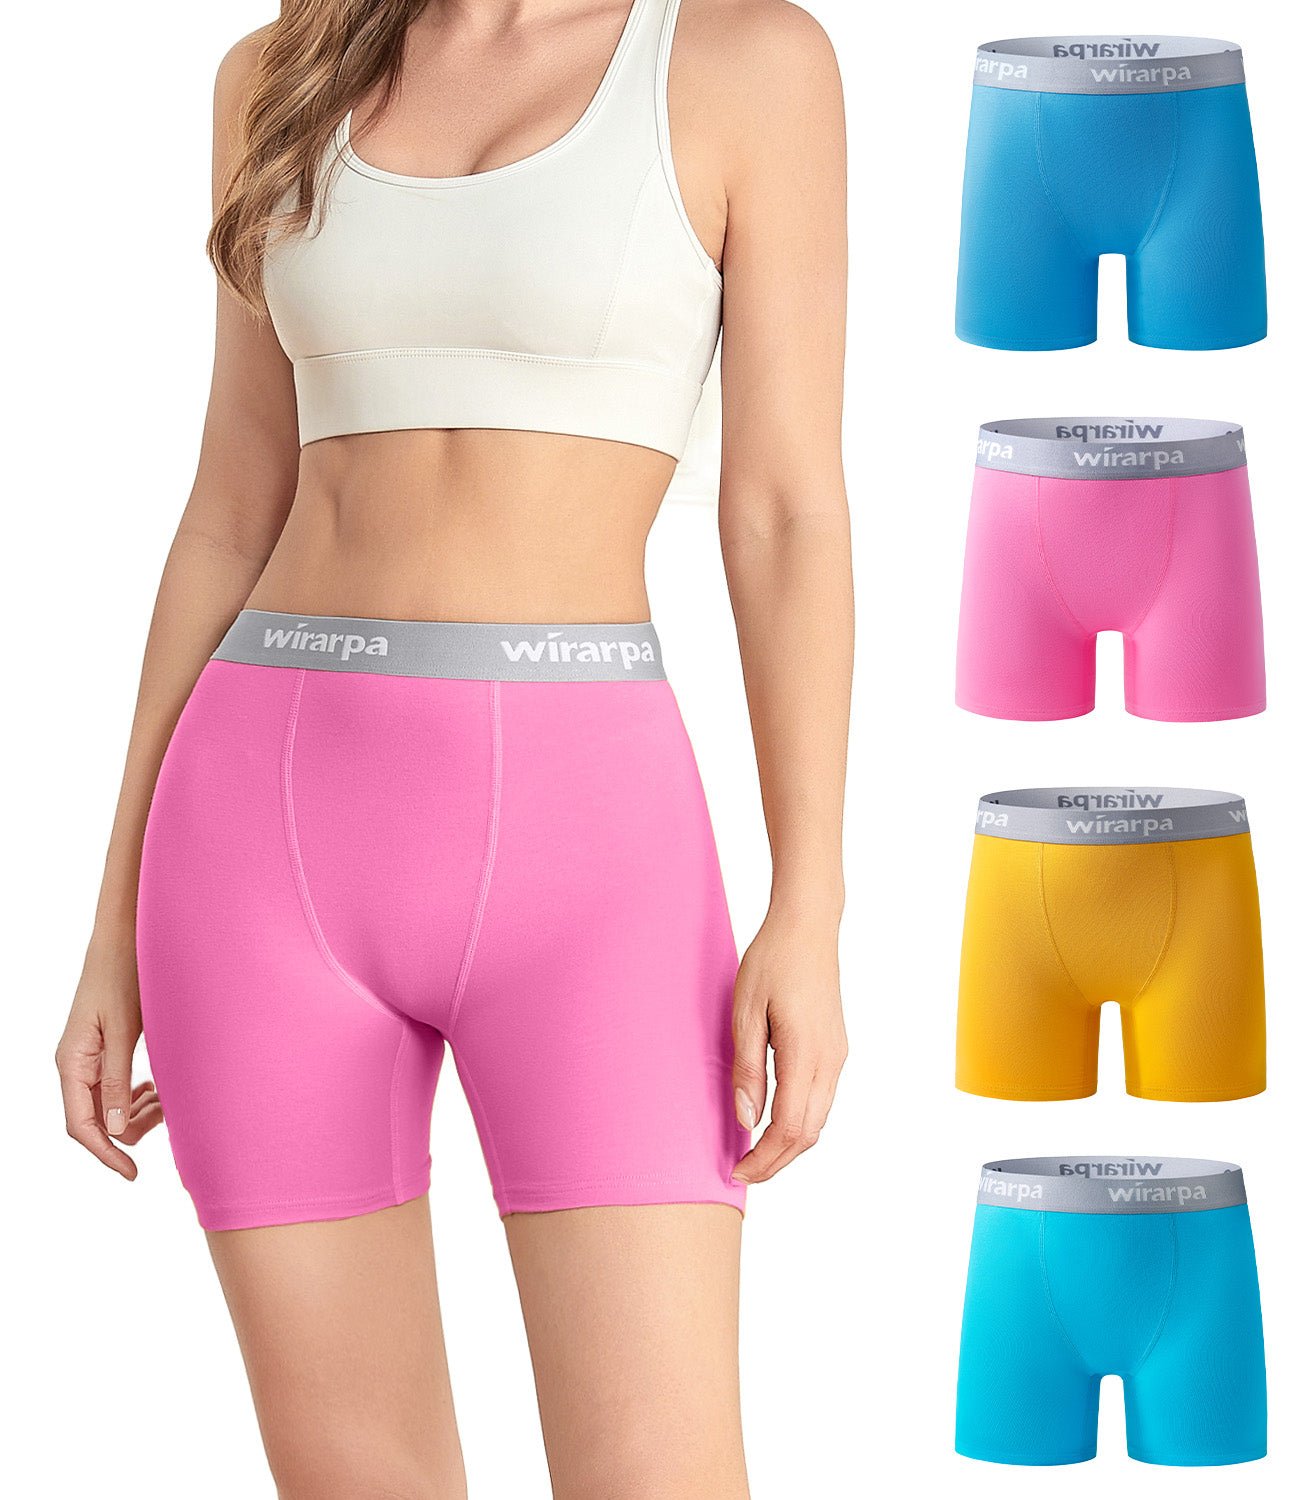 Ladies Safety Boxer Shorts Cotton Anti Chafing Long Leg Knickers Underwear  